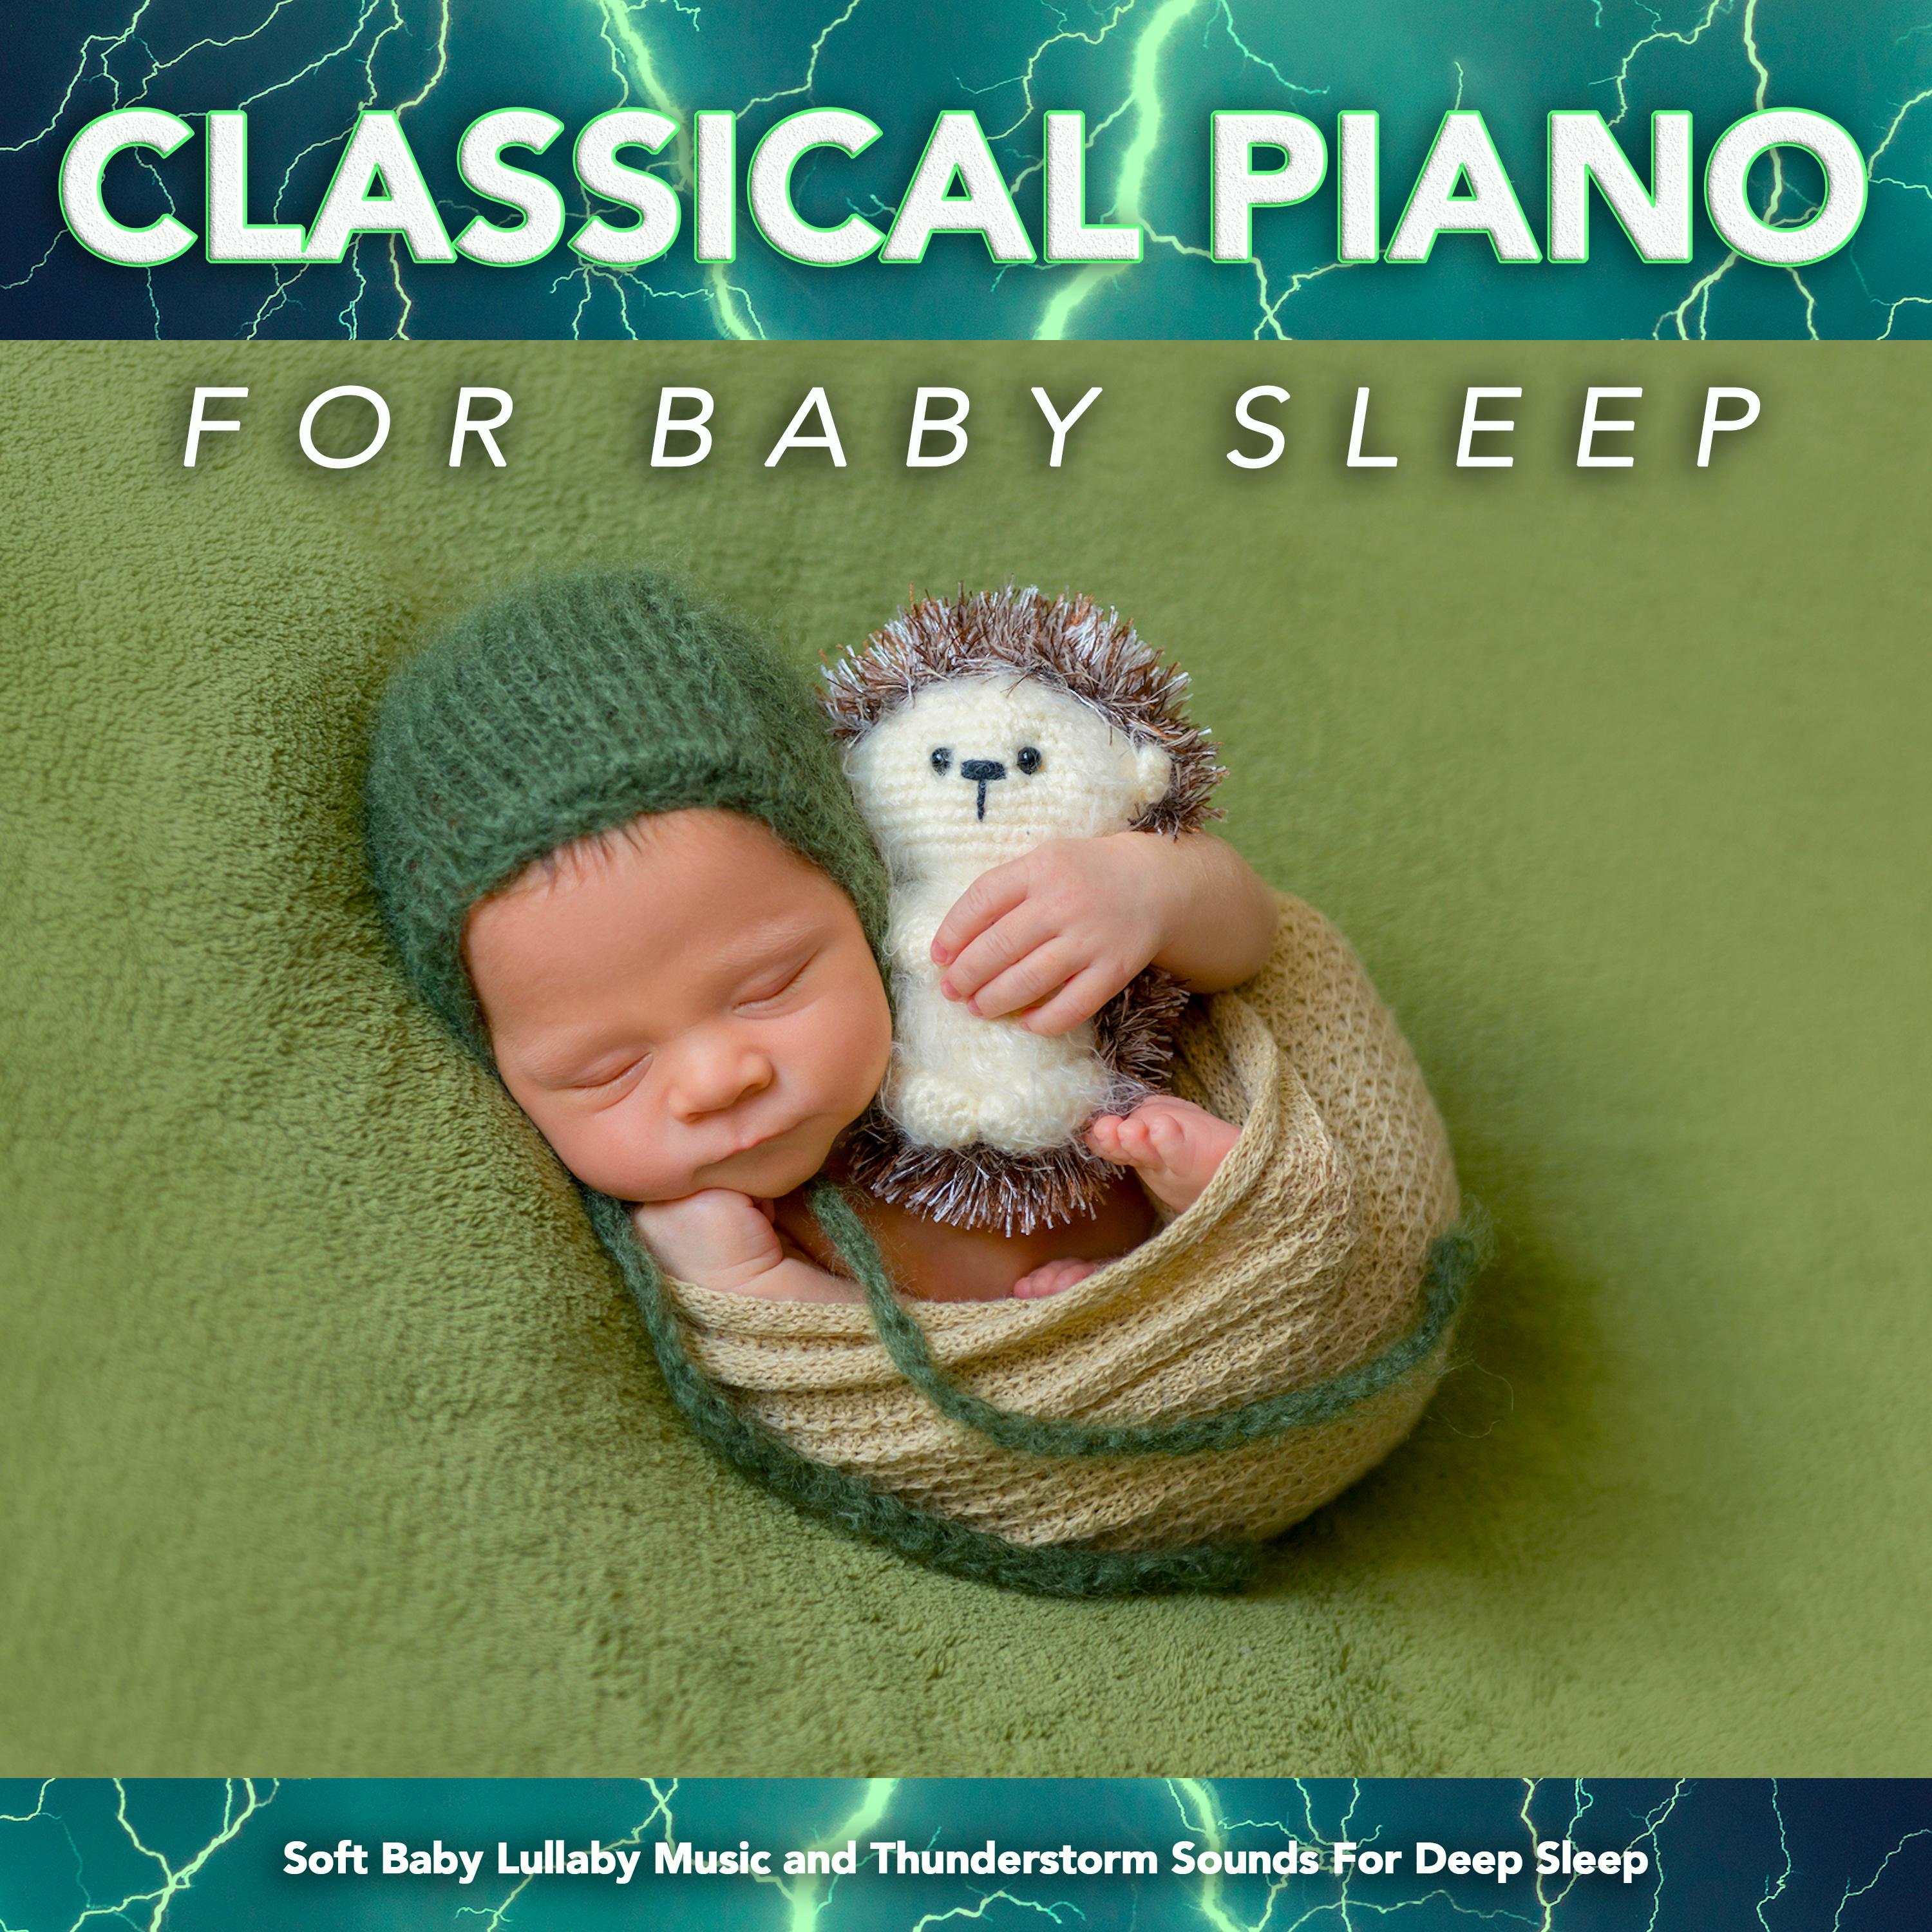 Slumberland - Schumann - Soft Baby Lullaby Music - Thunderstorm Sounds - Classical Piano for Baby Sleep